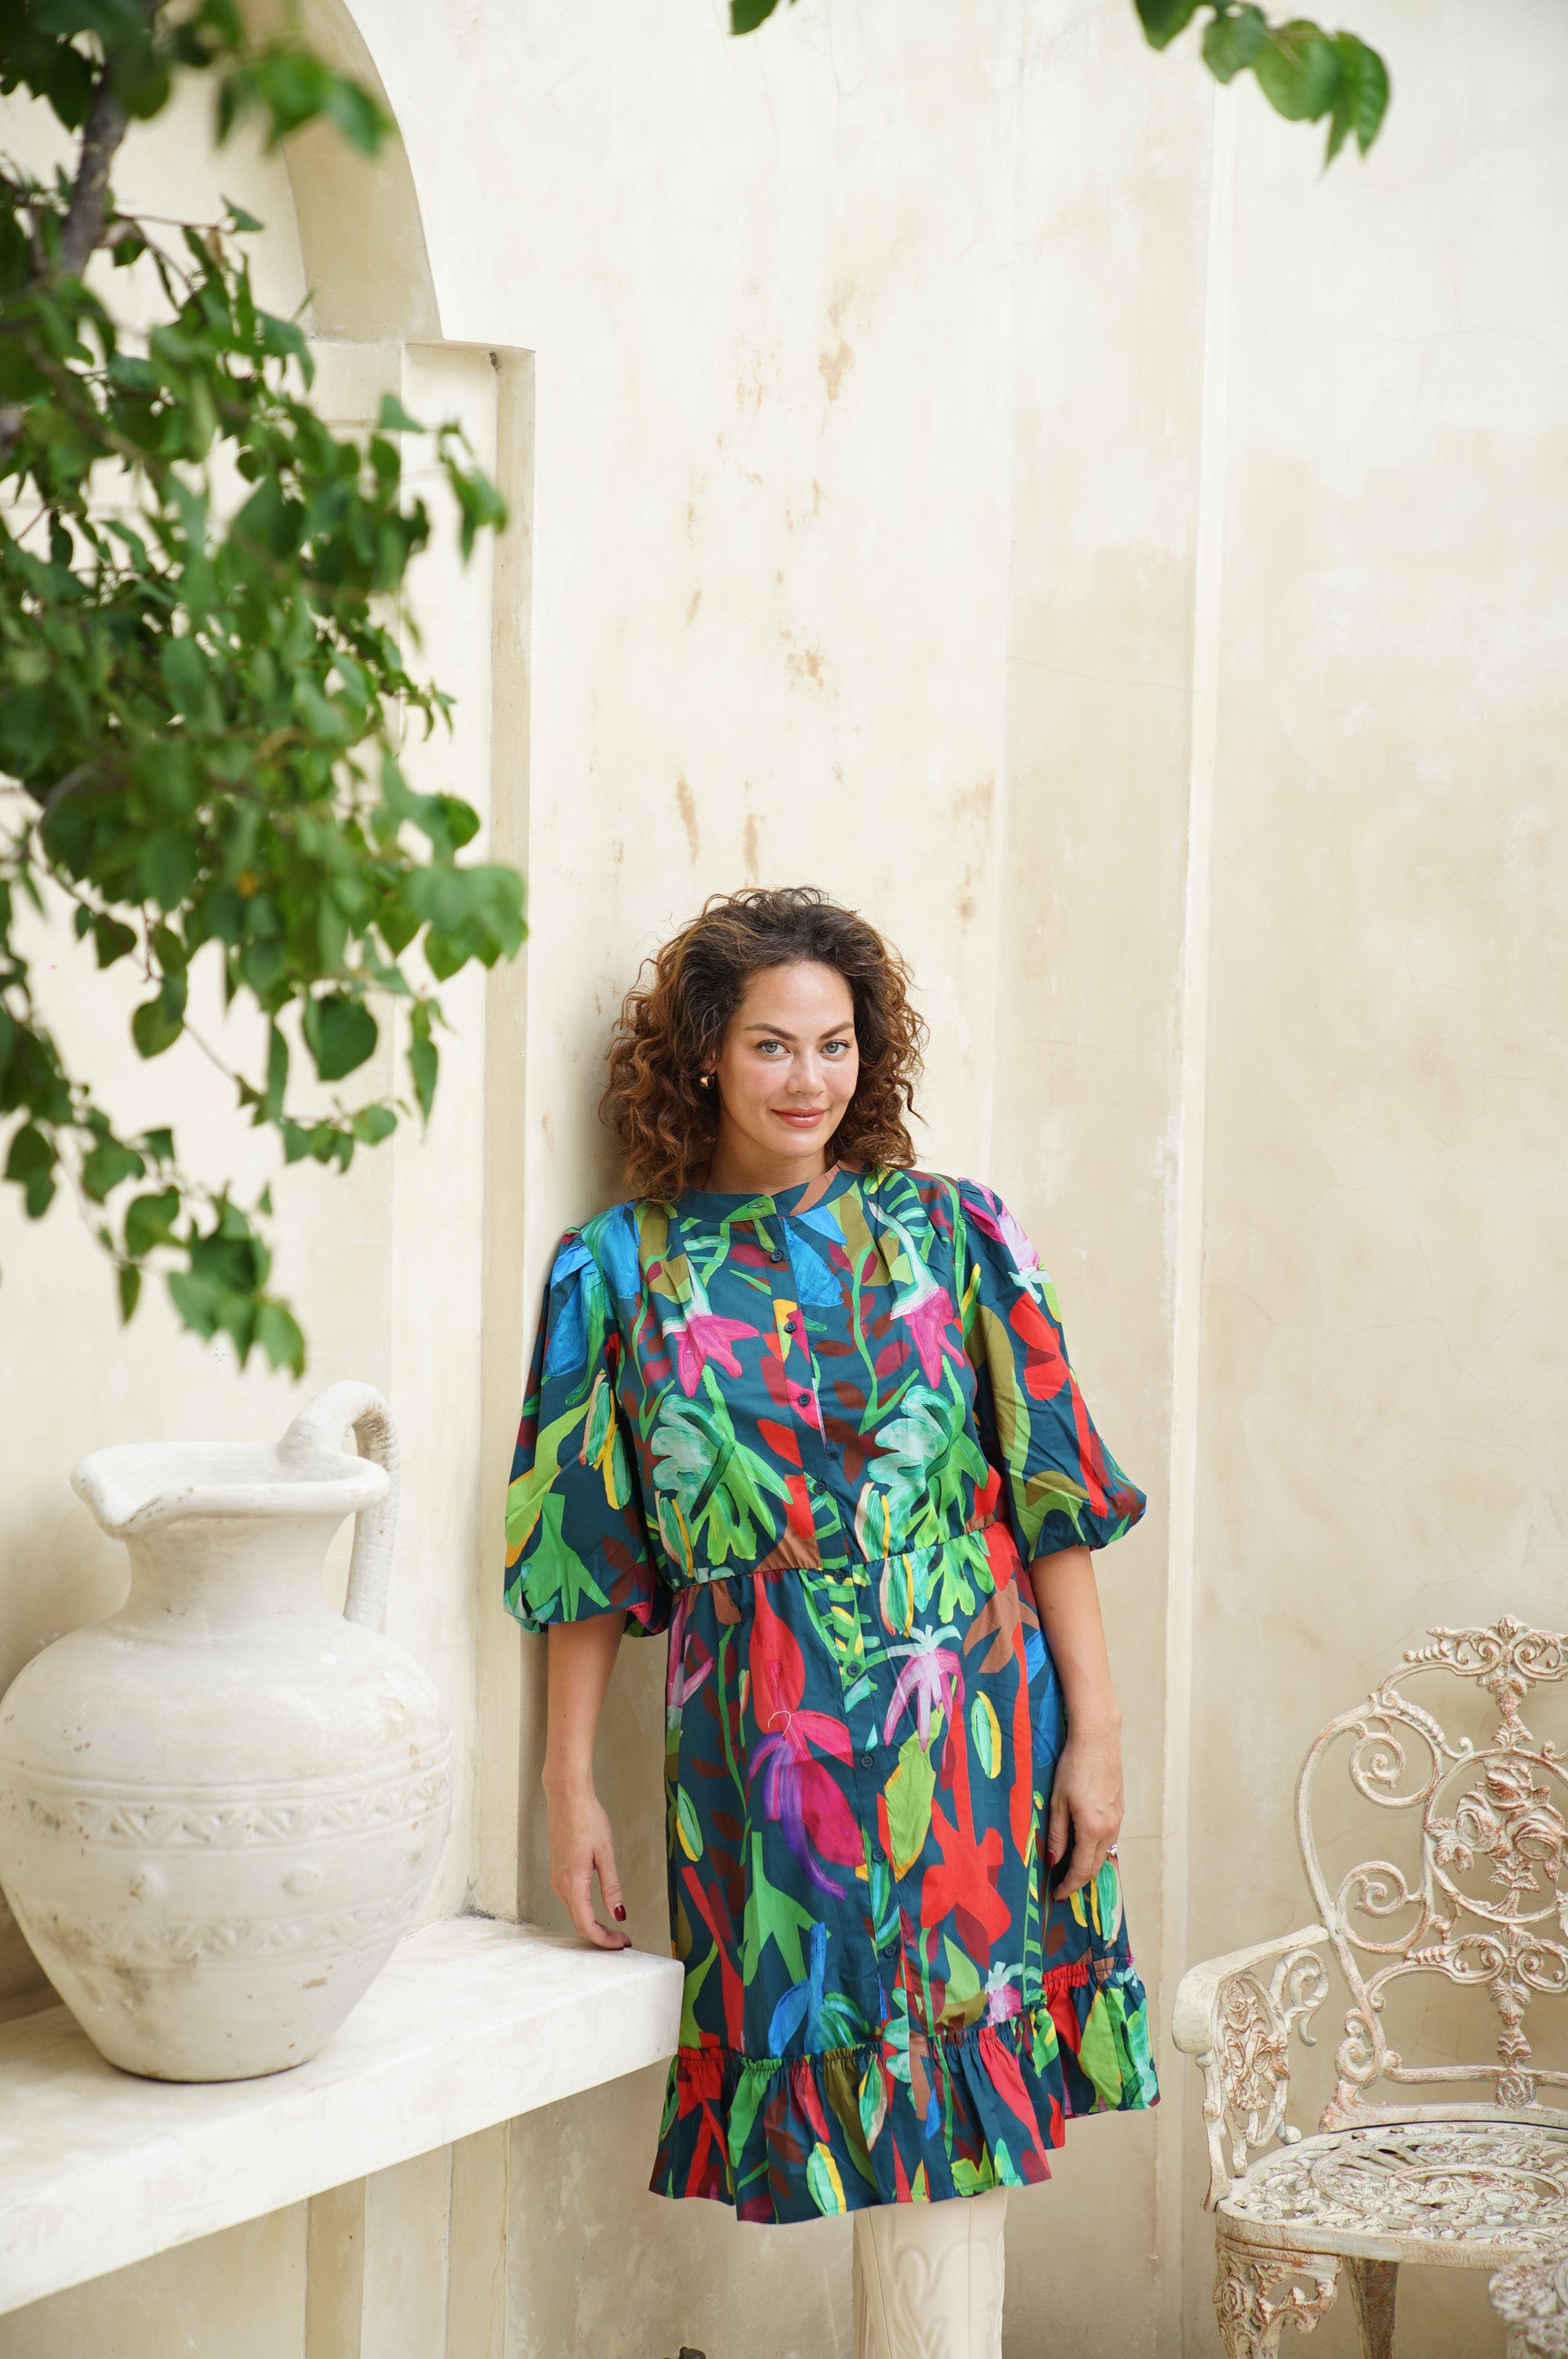 Step into paradise with our Tropical Bloom Midi Dress. Elegant, comfortable, and perfect for any event. Order yours today and bloom beautifully!